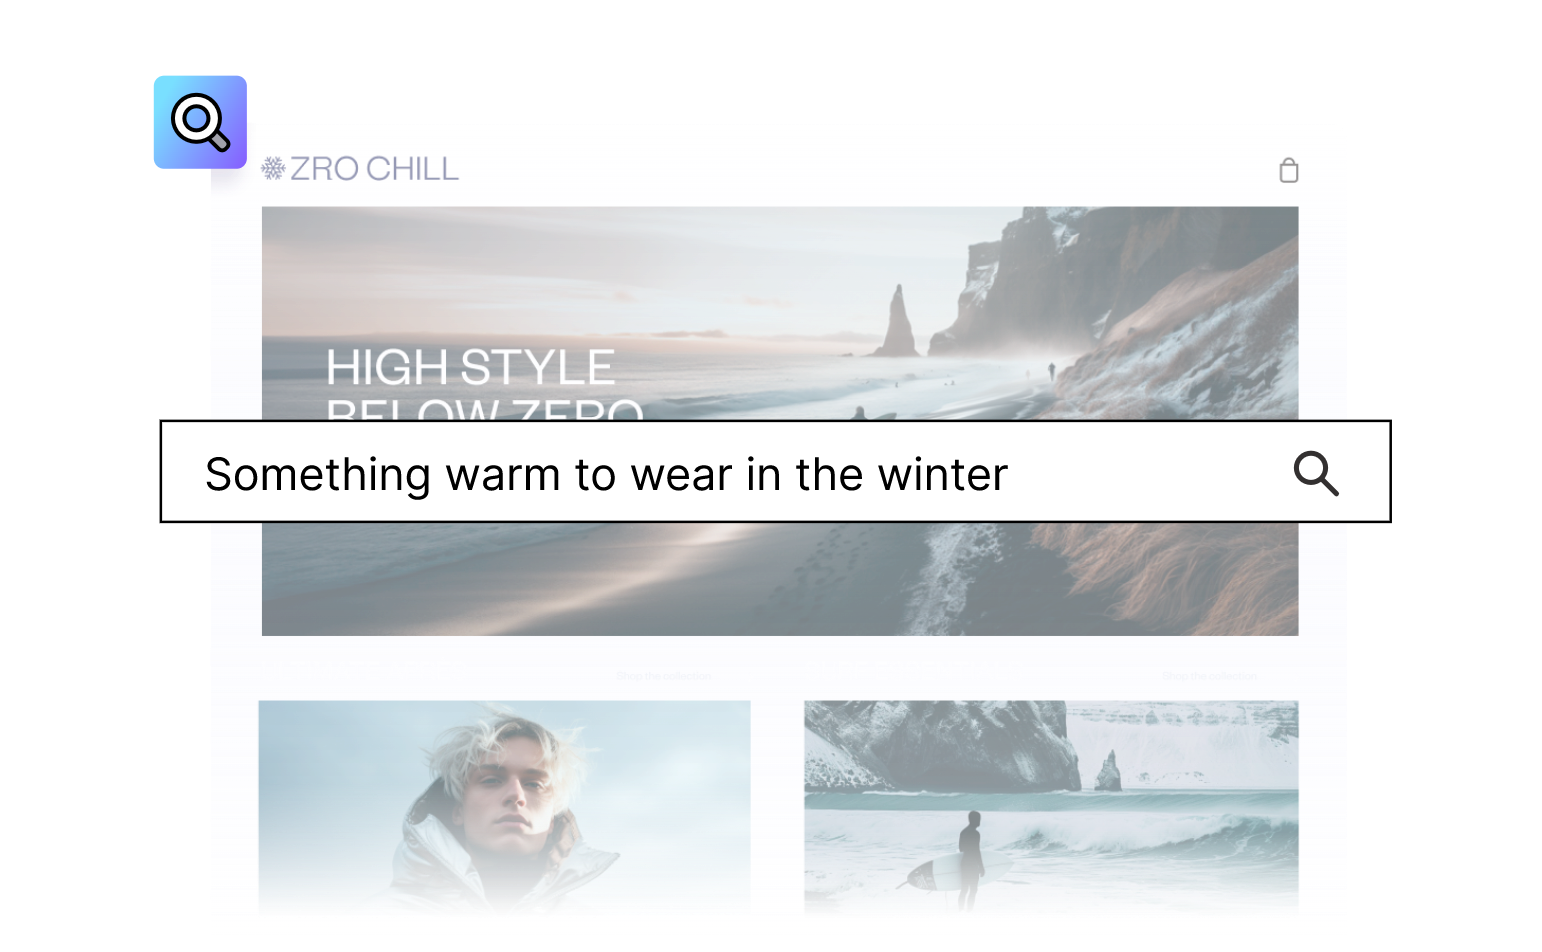  This image shows a digital mockup of a search engine interface for a website, possibly for winter clothing or accessories. The name "ZRO CHILL" is prominently displayed at the top, suggesting it could be the brand name or a tagline emphasizing a focus on cold weather gear. Below this, there's a large banner featuring an icy beach landscape with the text "HIGH STYLE BELOW ZERO", implying that the website offers stylish clothing for very cold conditions. The search bar in the middle of the image has the placeholder text "Something warm to wear in the winter", indicating the user can search for winter clothing on the site. Below the search bar, there are two smaller images. The left one has a label "ULTIMATE APRÈS" with a picture of a person wearing a puffy jacket, indicating a section for post-skiing or outdoor activity wear. The right one is labeled "SURF ESSENTIALS" with a picture of an individual holding a surfboard by the icy sea, which might suggest gear for cold-water surfing. The overall theme of the interface is winter and cold-weather activities.